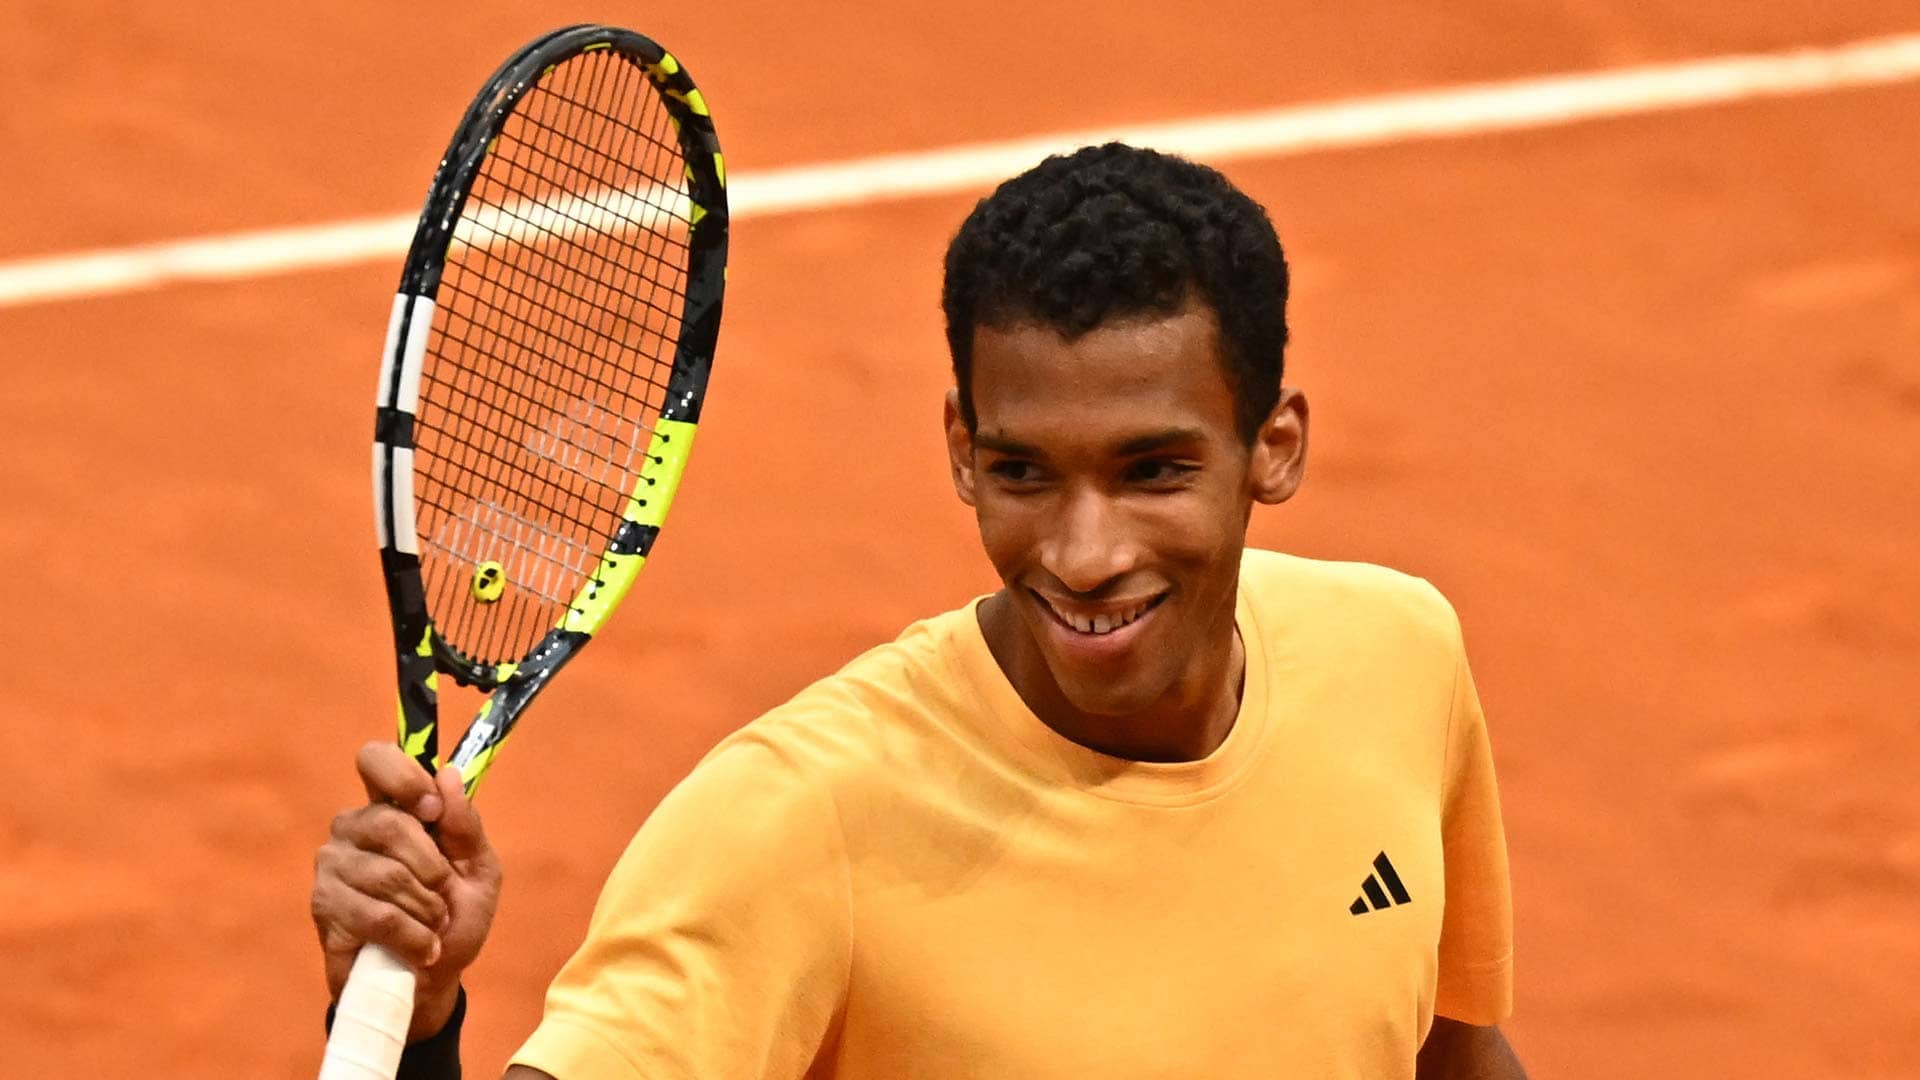 Felix Auger-Aliassime earns the best clay-court win of his career by PIF ATP Rankings.